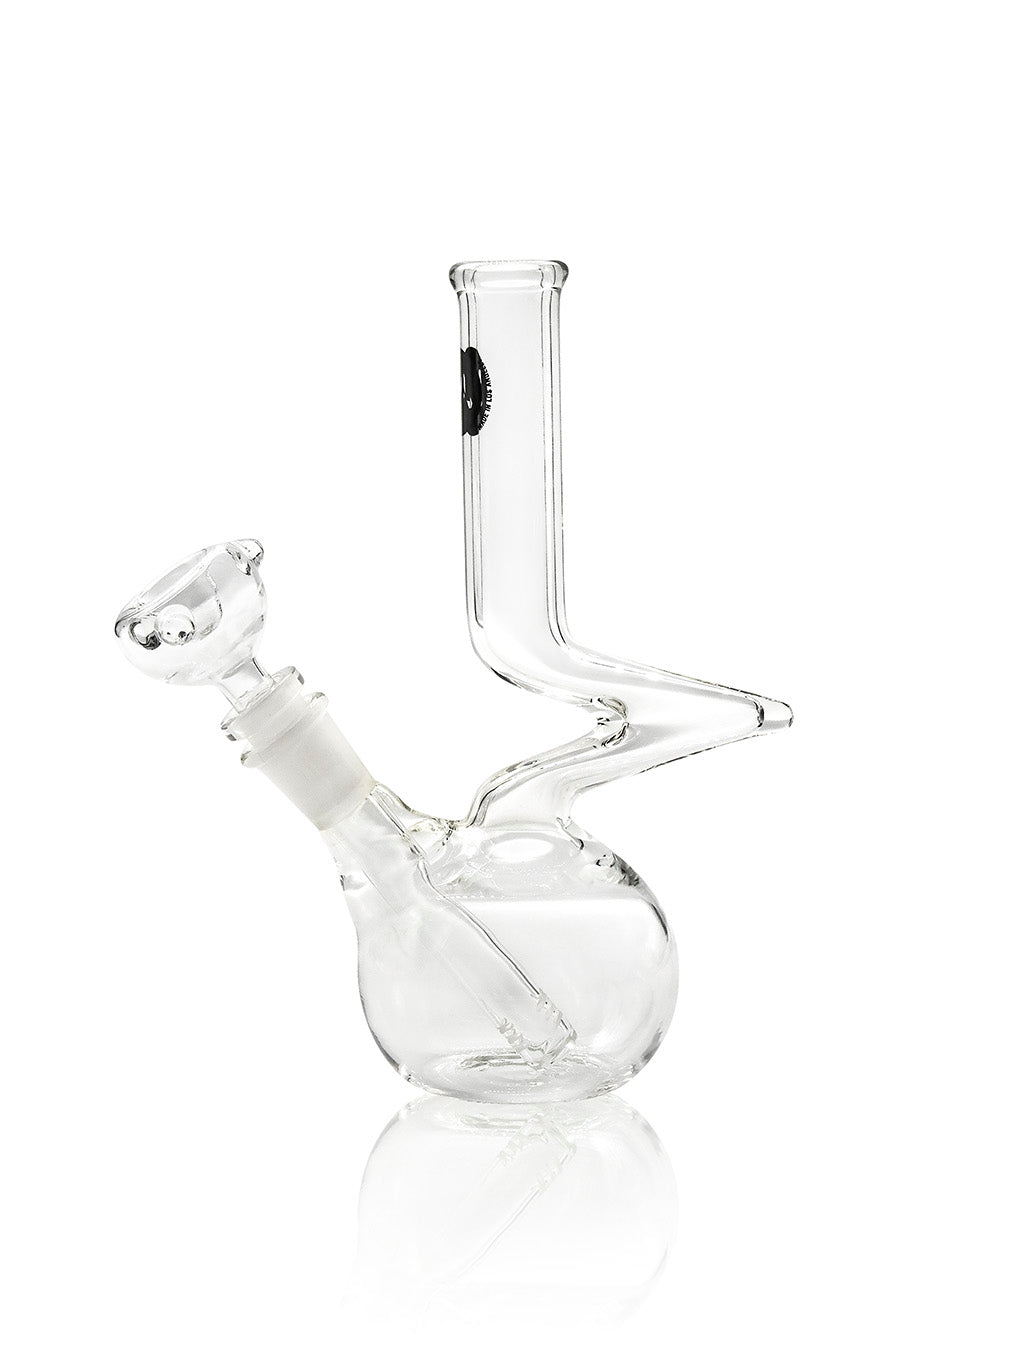 LA Pipes "The Zong" Compact Zong Style Bong in Borosilicate Glass with 45 Degree Joint Angle